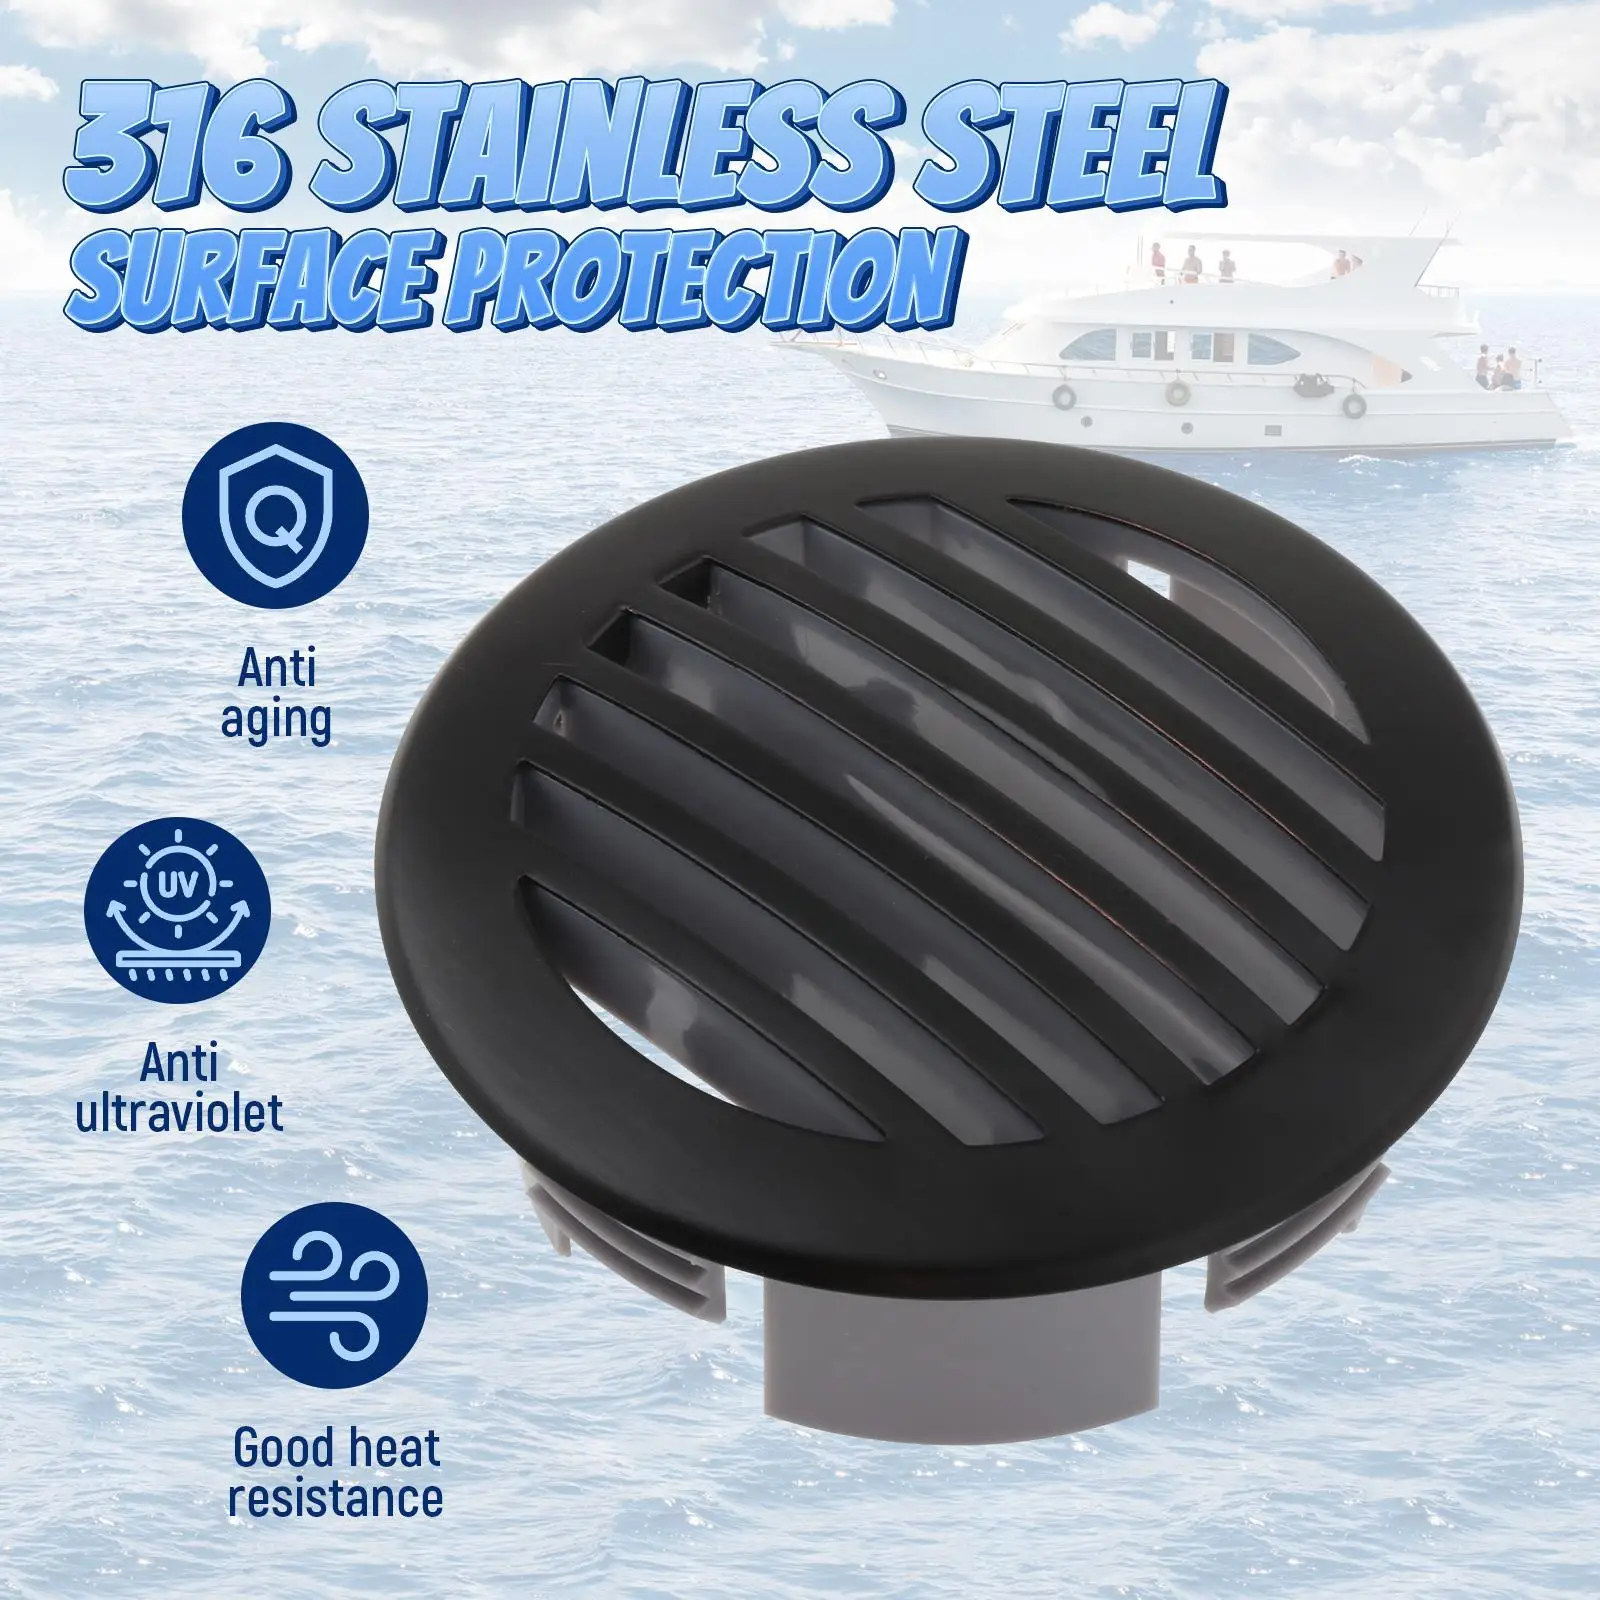 Stainless Grill Vent Cover Replaces 81932ss-hp for Yacht Marine Sailing